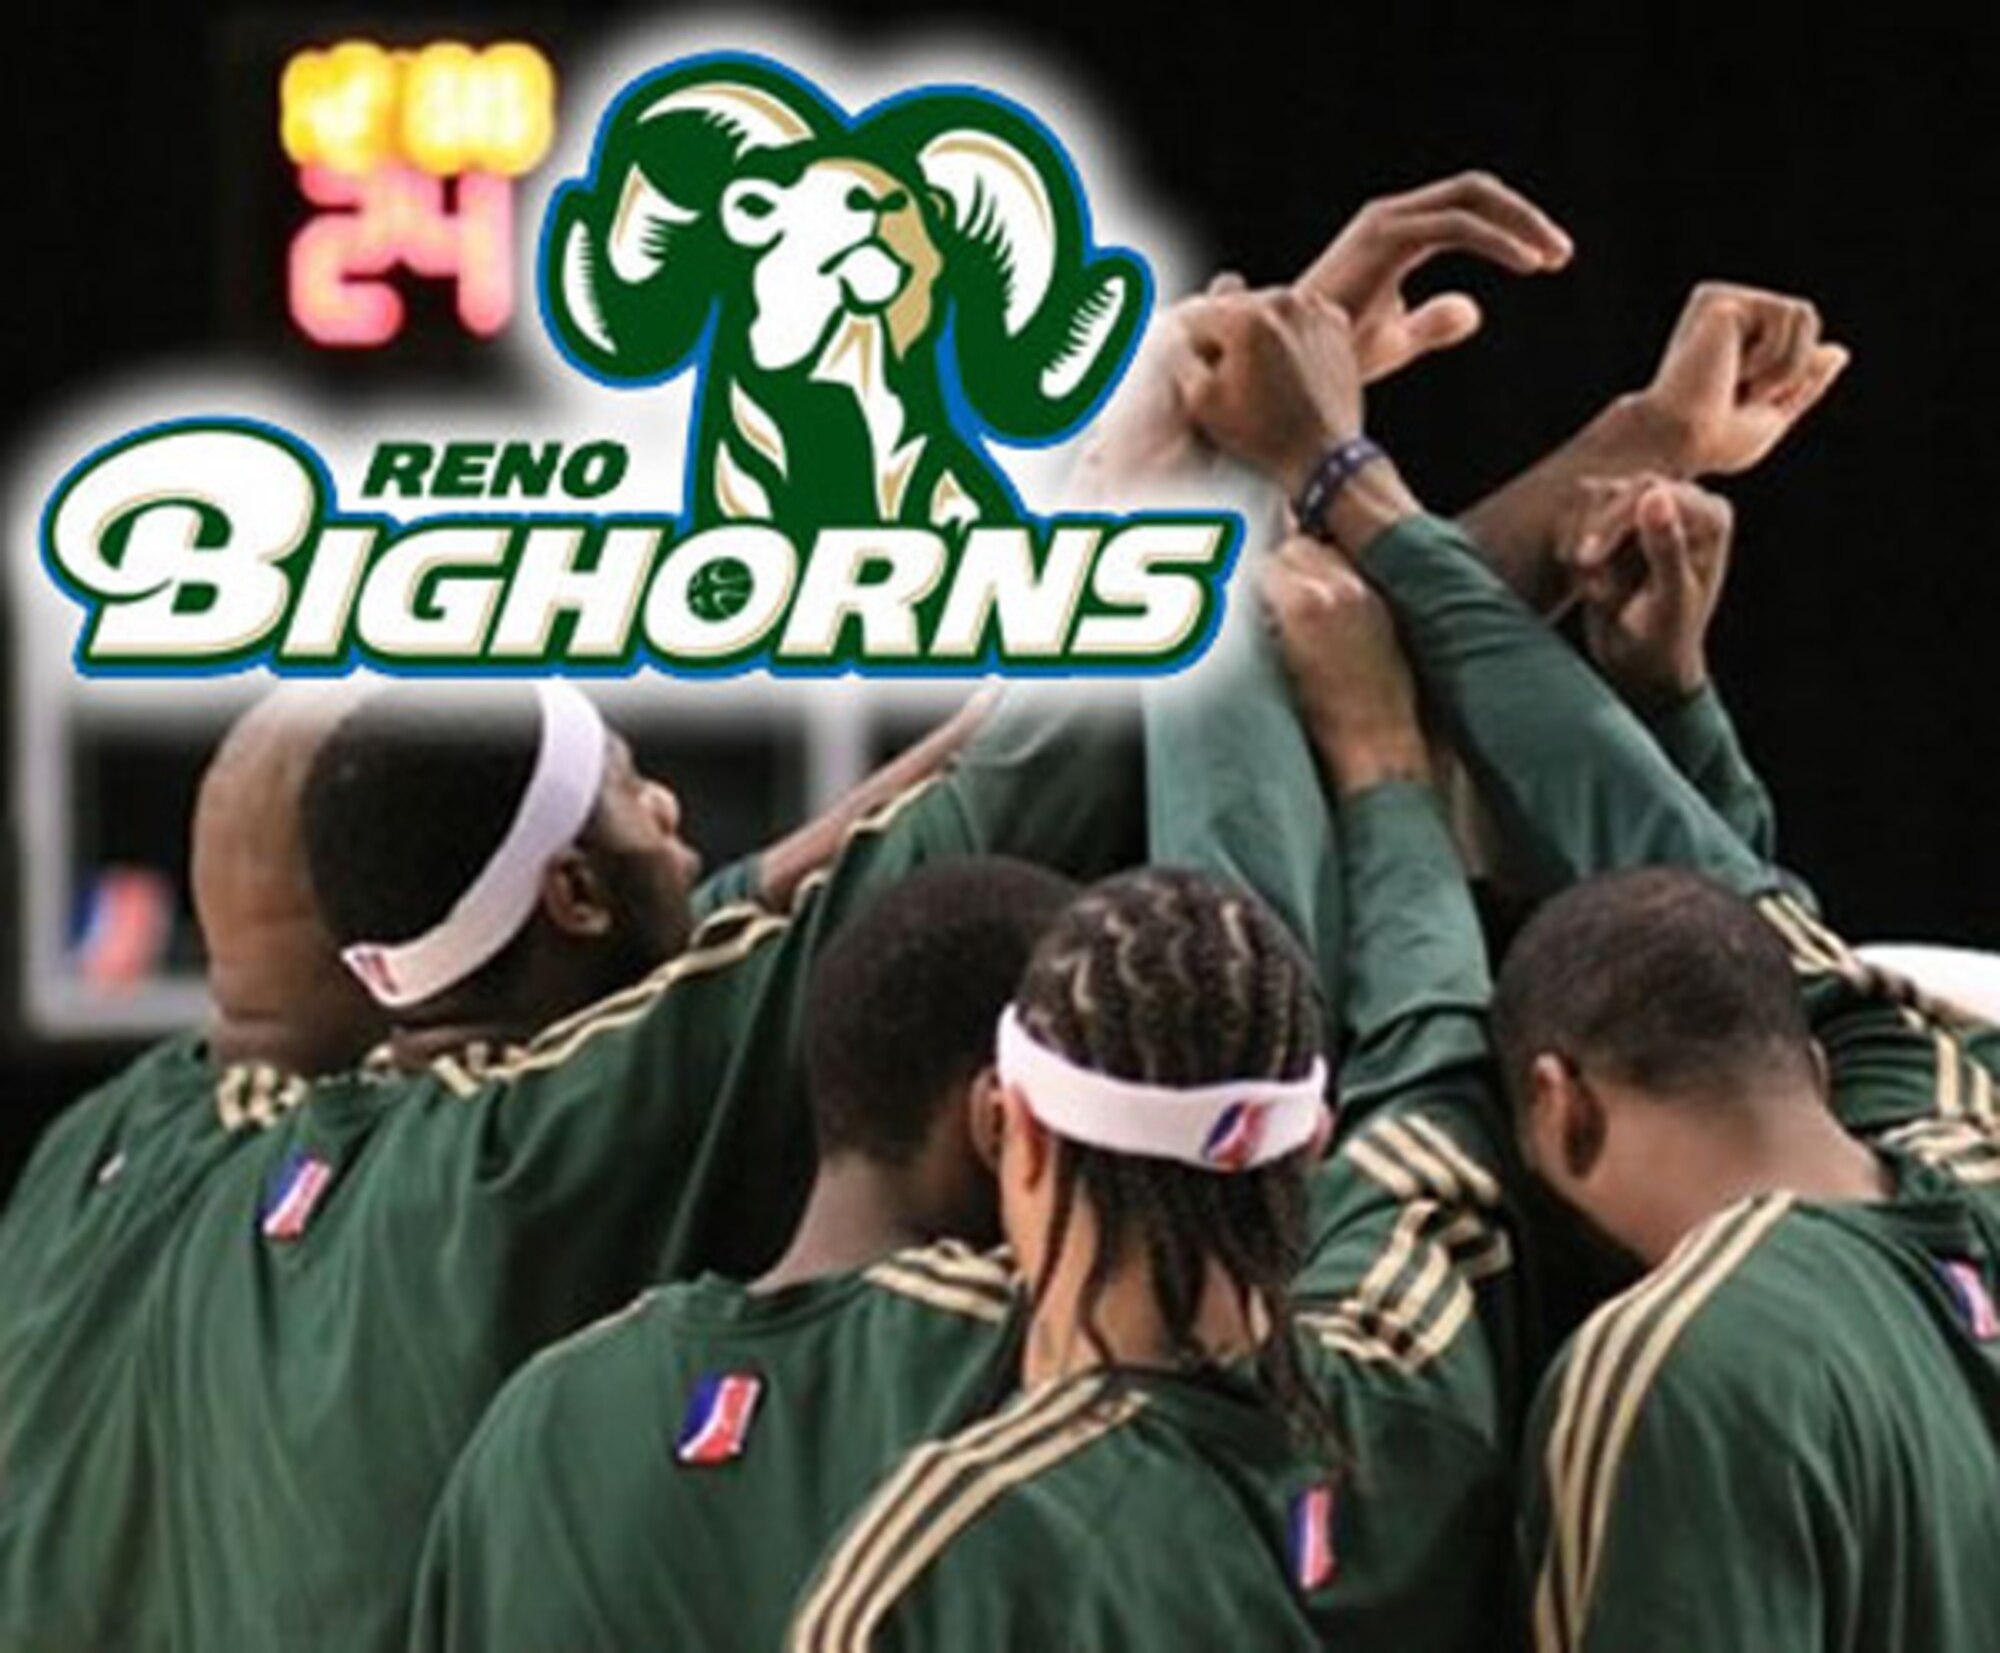 The Reno Bighorns Basketball Team is set to host its Military Appreciation Night on Saturday, January 31. Nevada Guardsmen can call 775-250-6441 for tickets to the game. Tip-off for the game is at 7 p.m. at the Reno Events Center